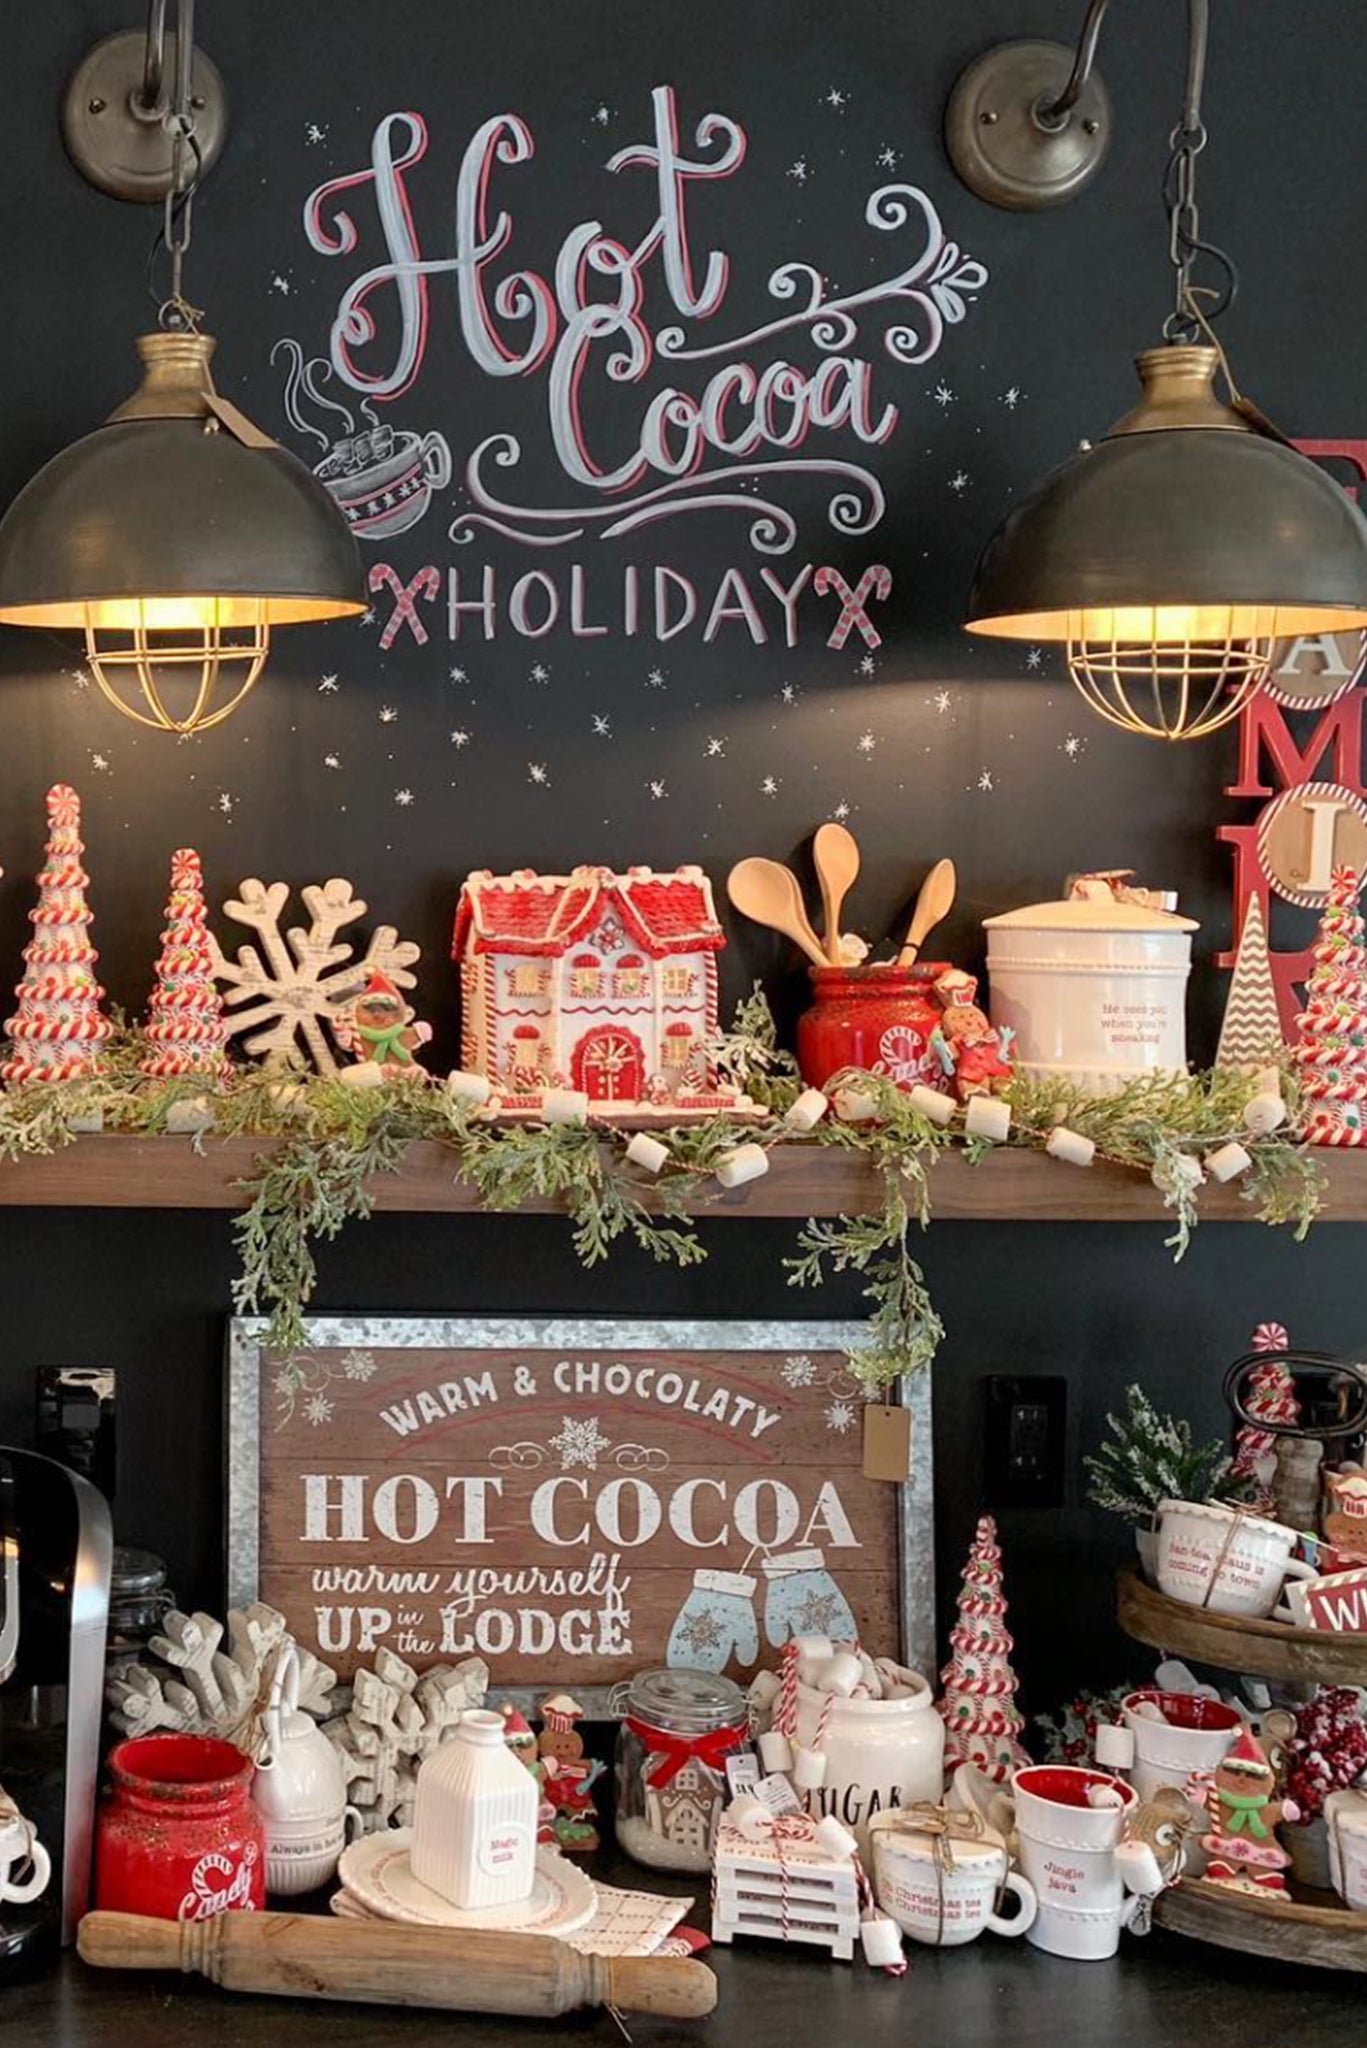 Holiday Coffee & Hot Cocoa Bar Ideas - Pretty Collected